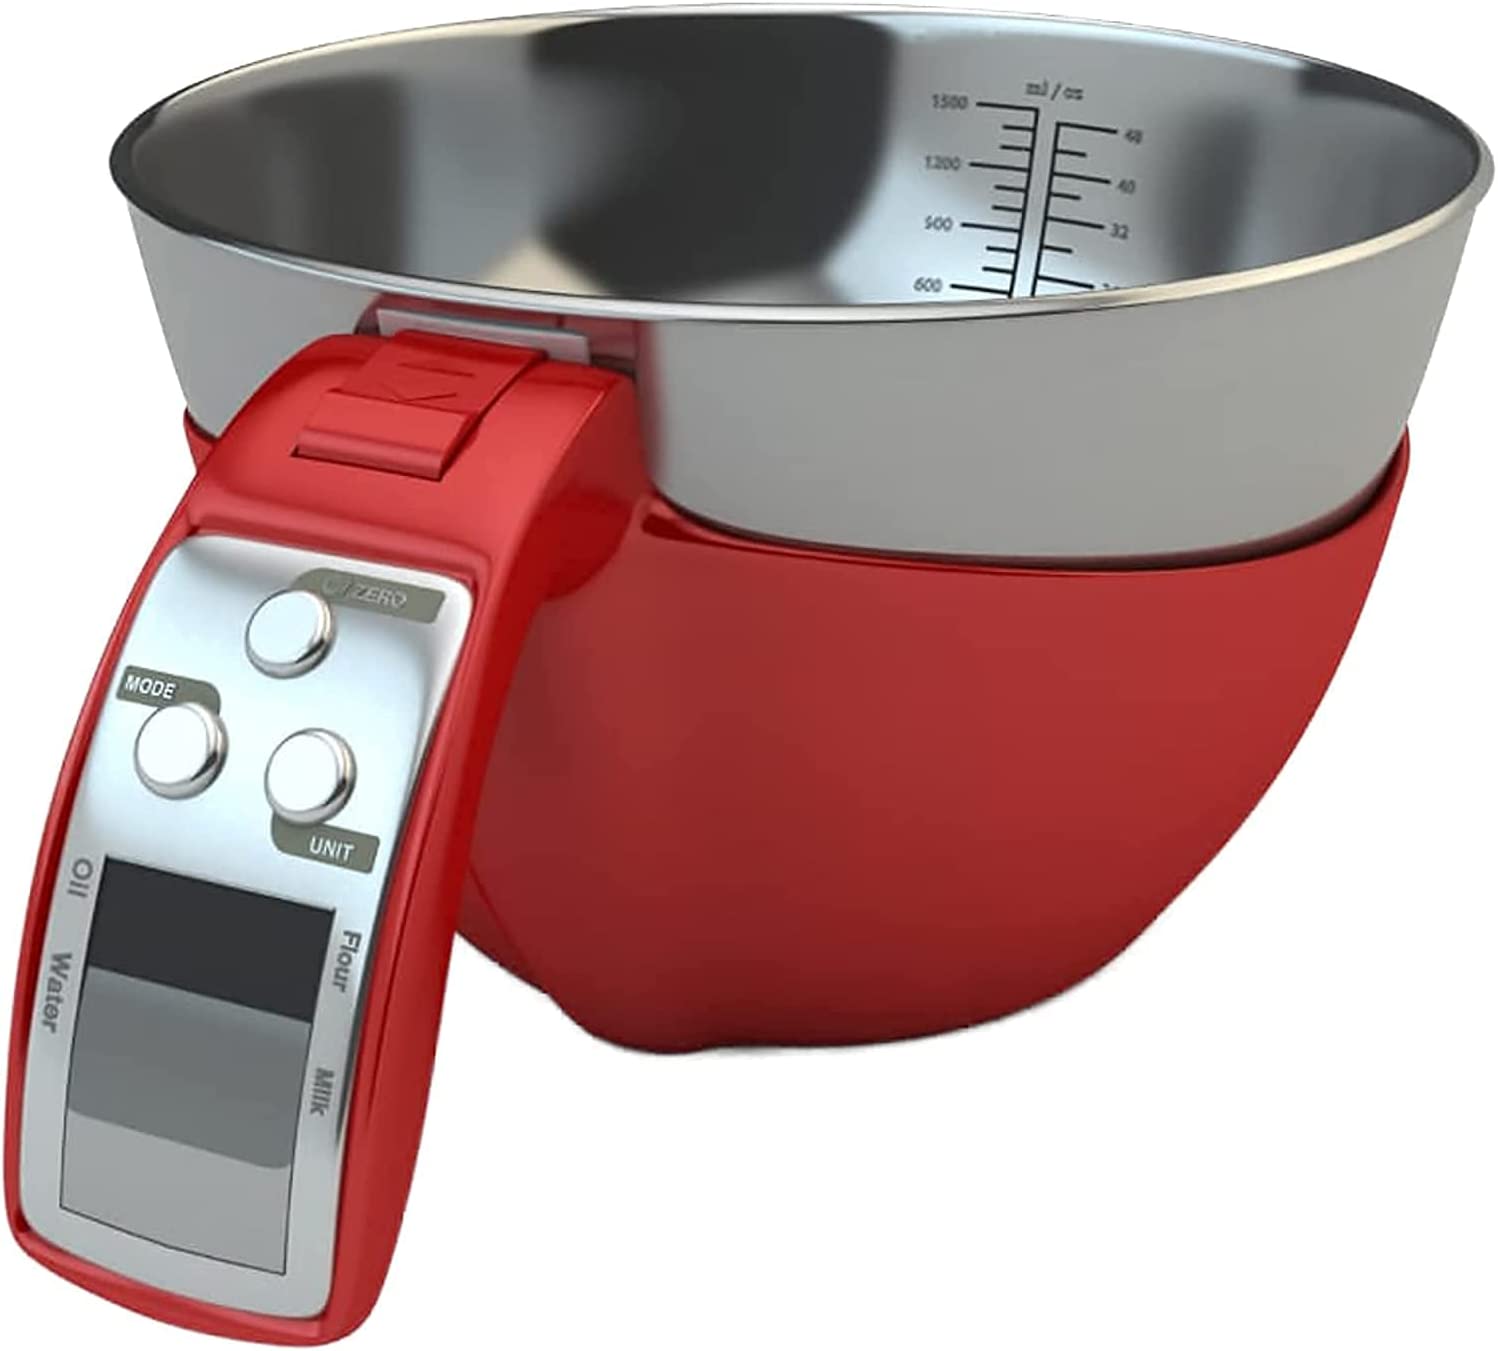 Digital Measuring Cup And Scale, Food Weighing Scale, Jug Scales